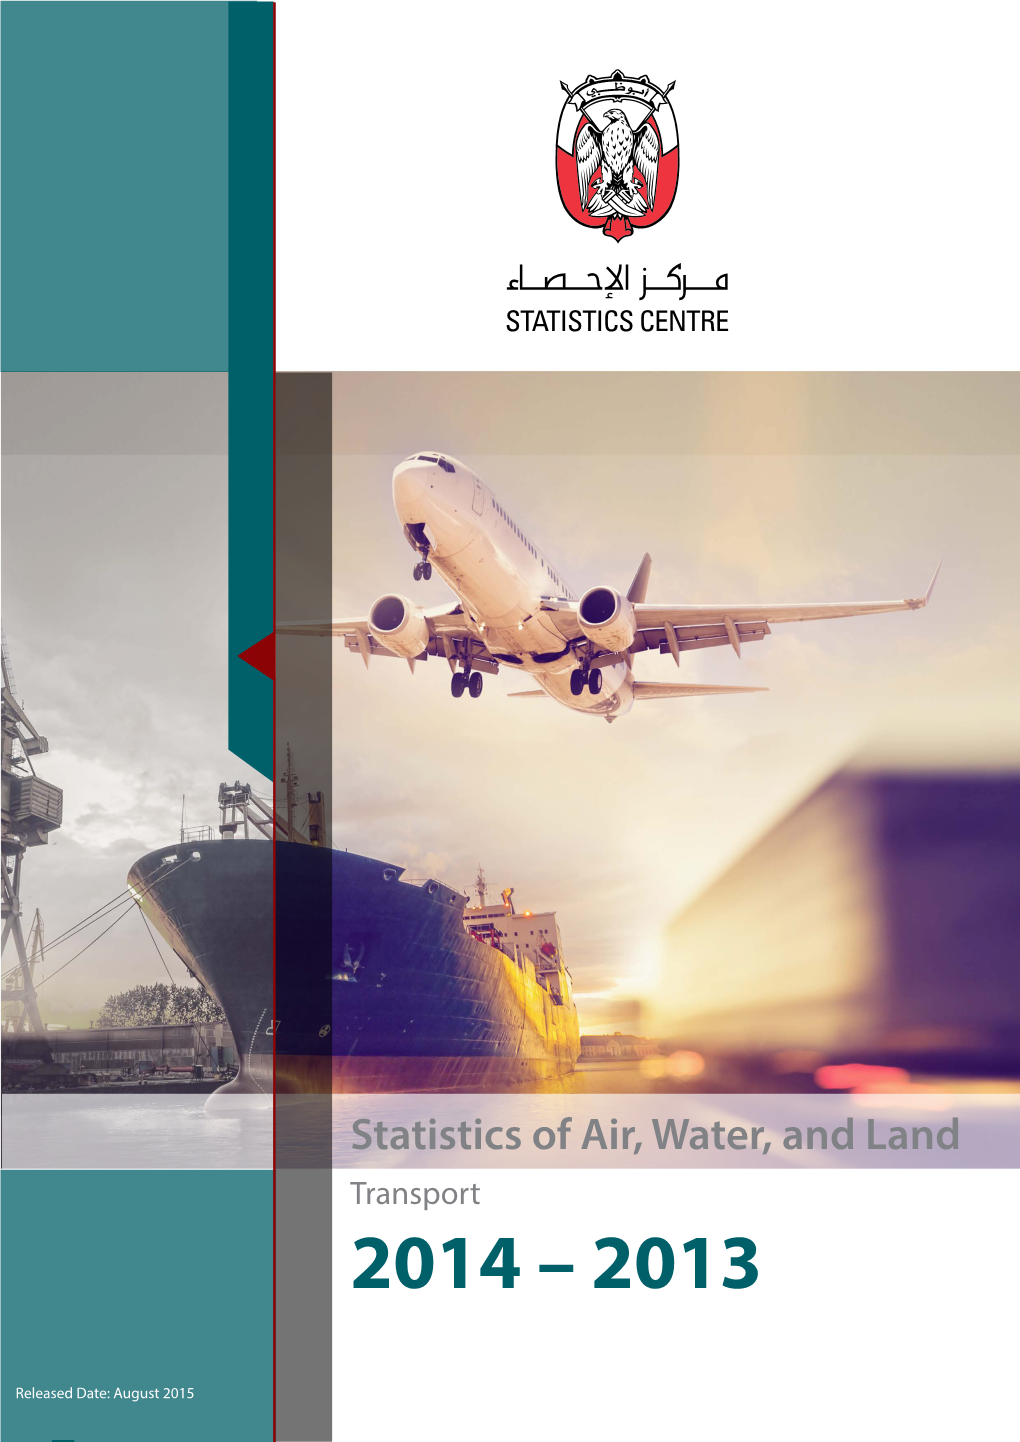 Statistics of Air, Water, and Land Transport and Land Water, of Air, Statistics